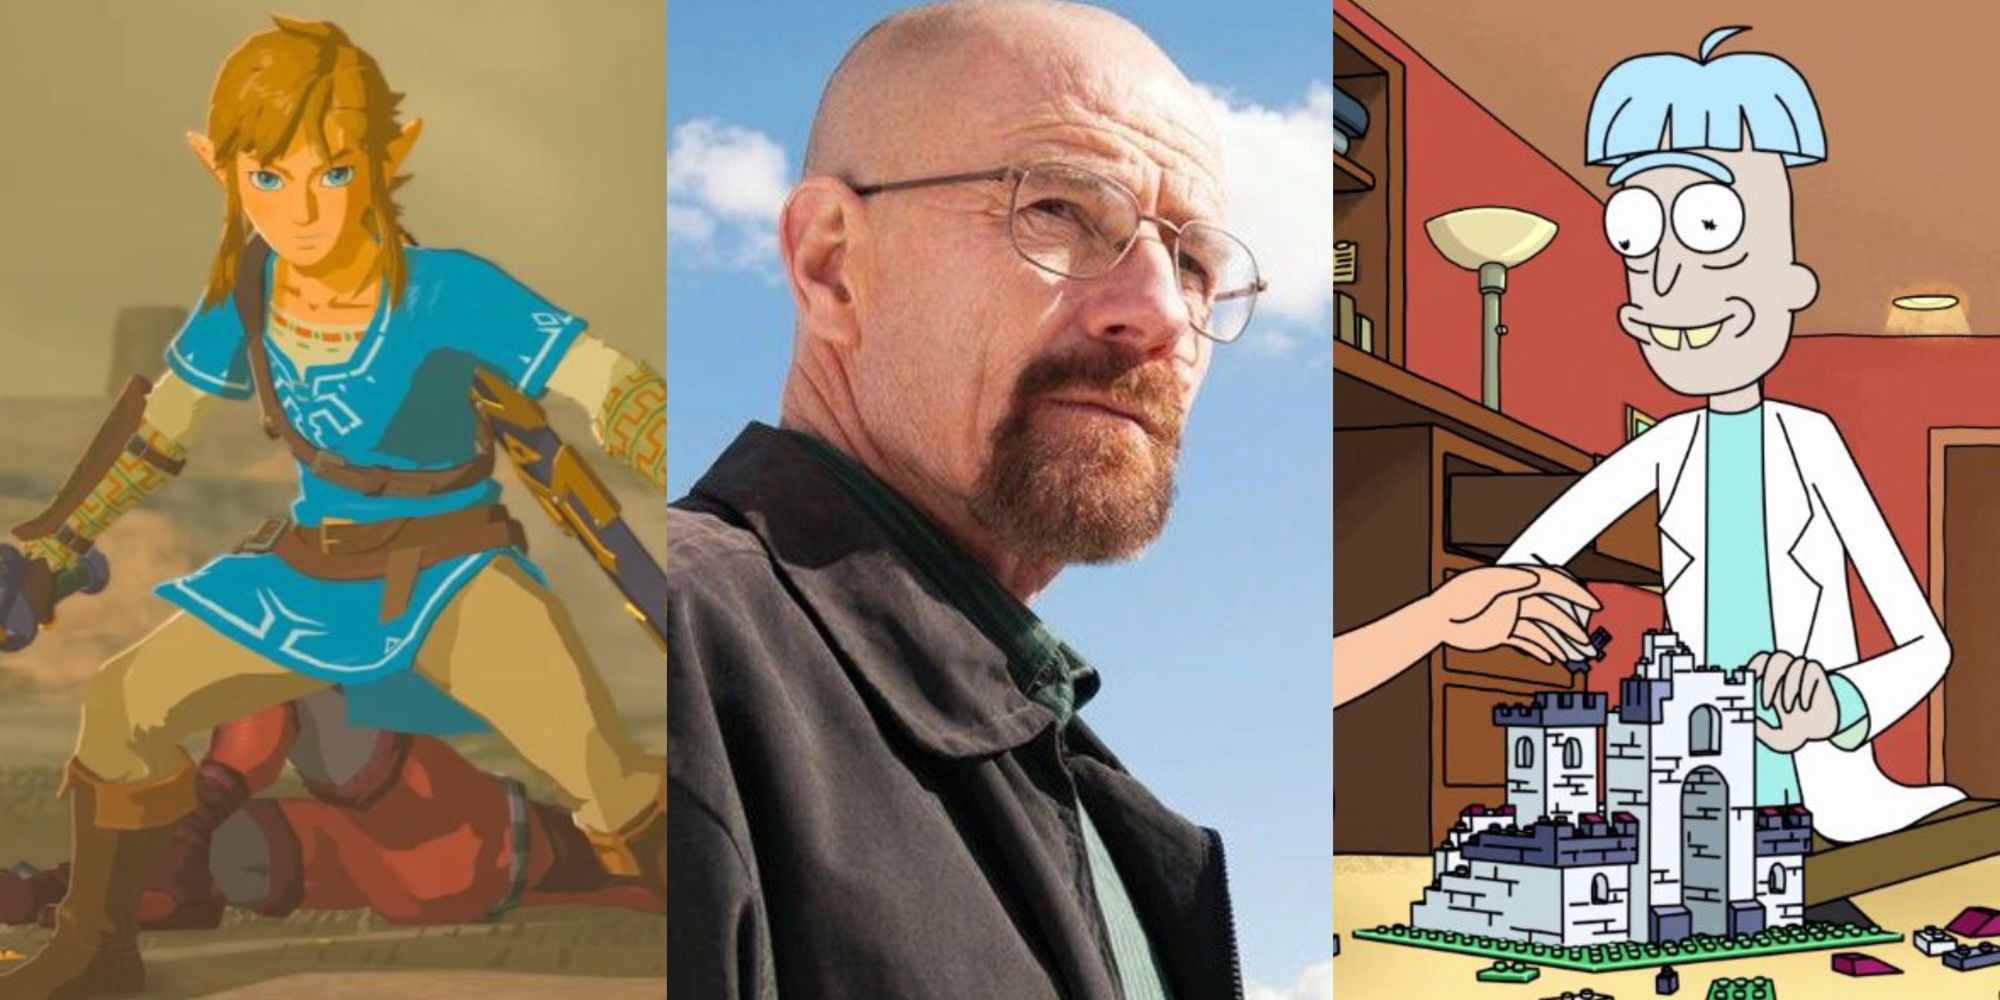 link in breath of the wild, walter white from breaking bad, doofus rick from rick and morty